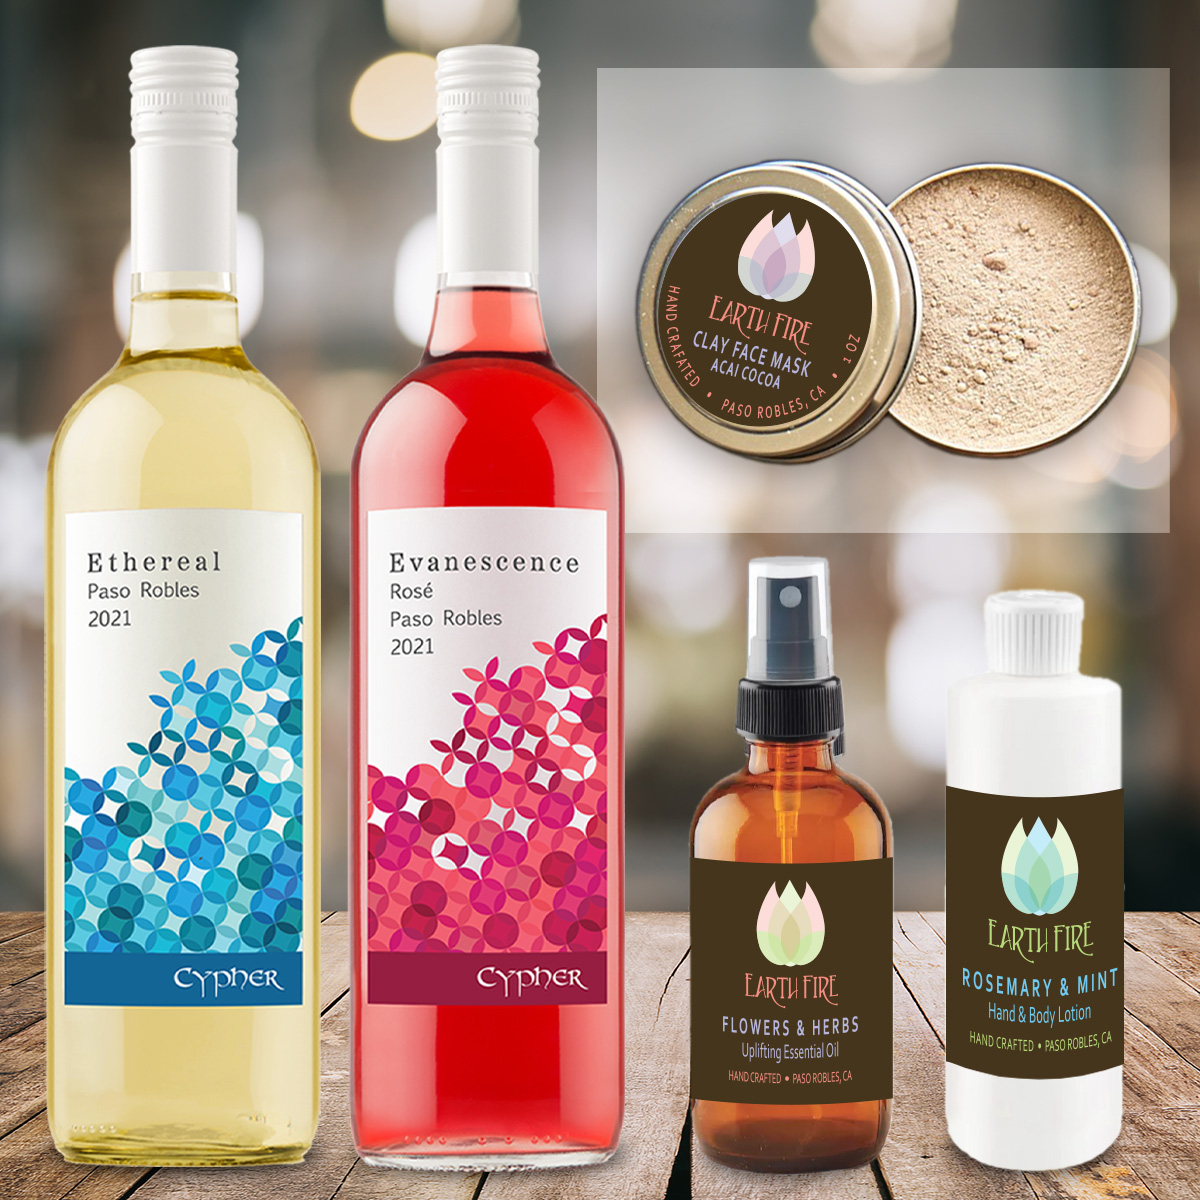 Product Image for Wine & Spa Day